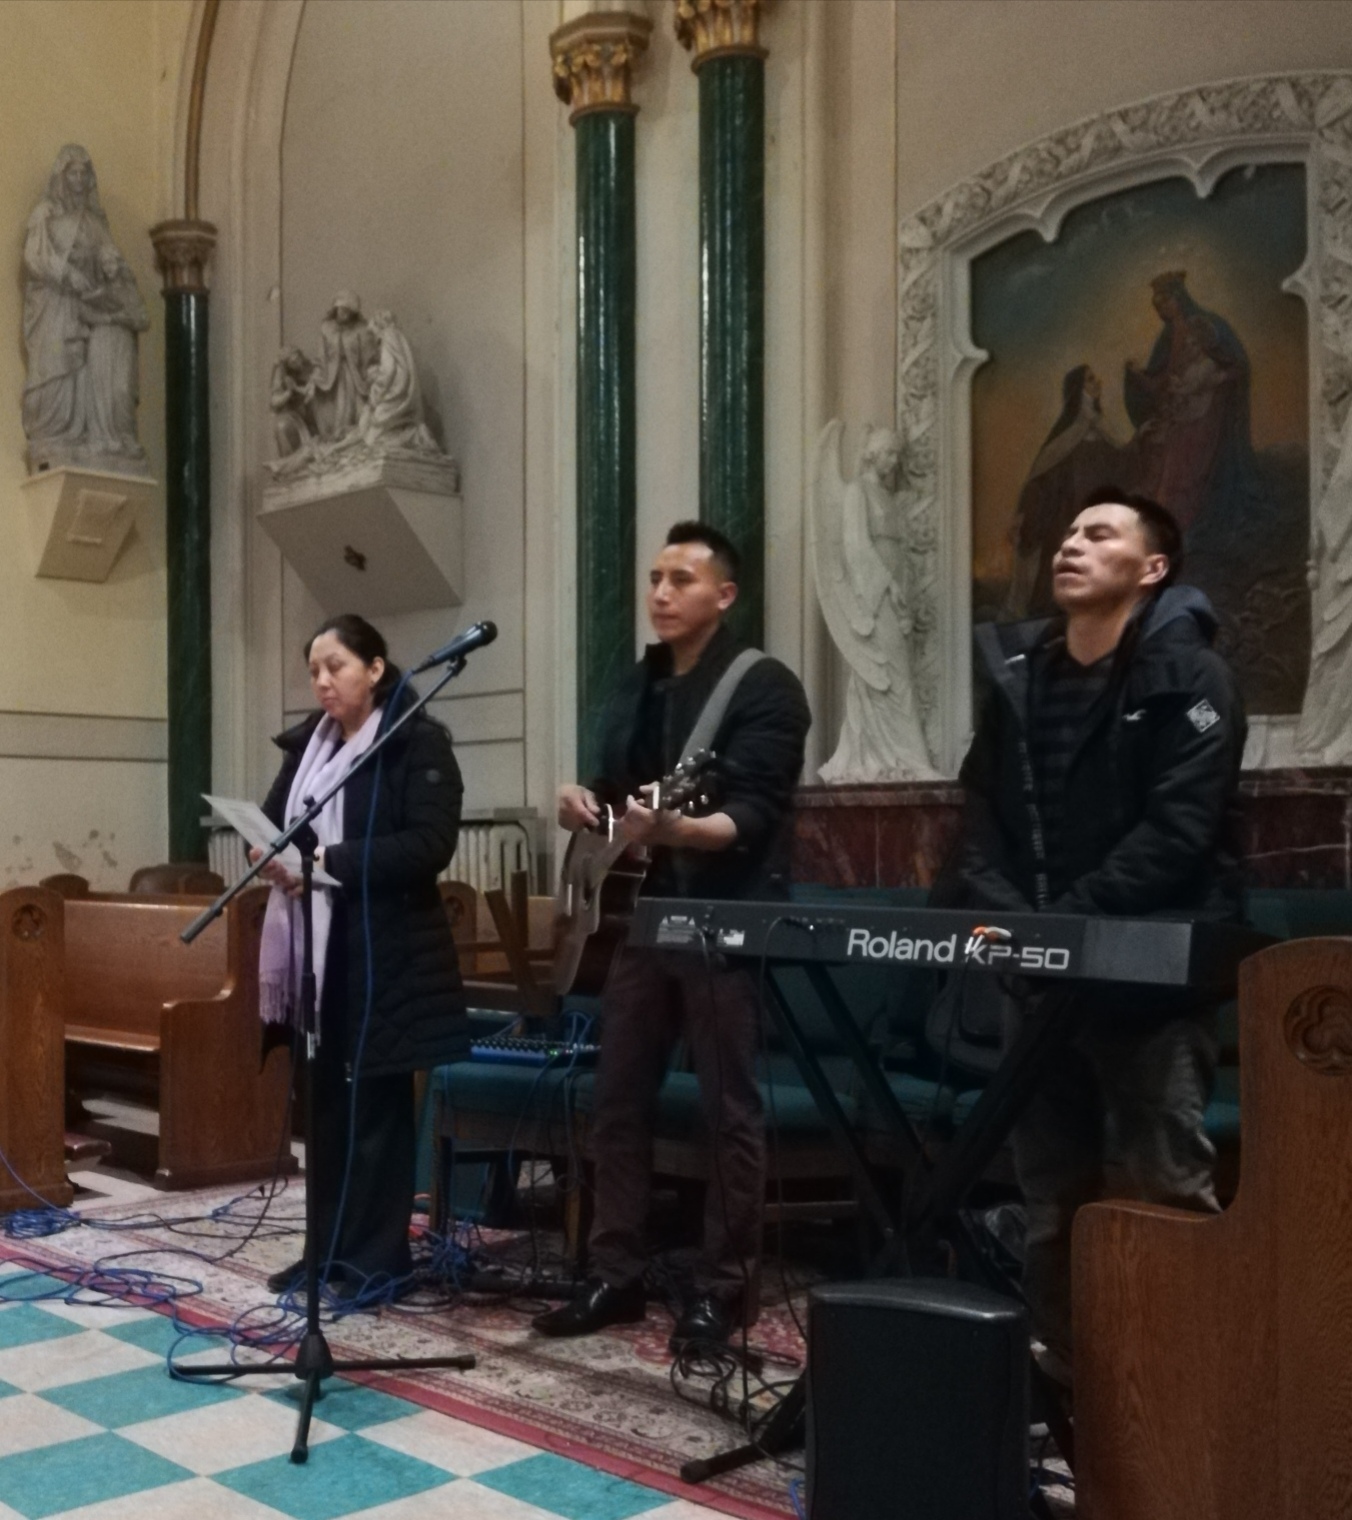 A group of people singing in a church.